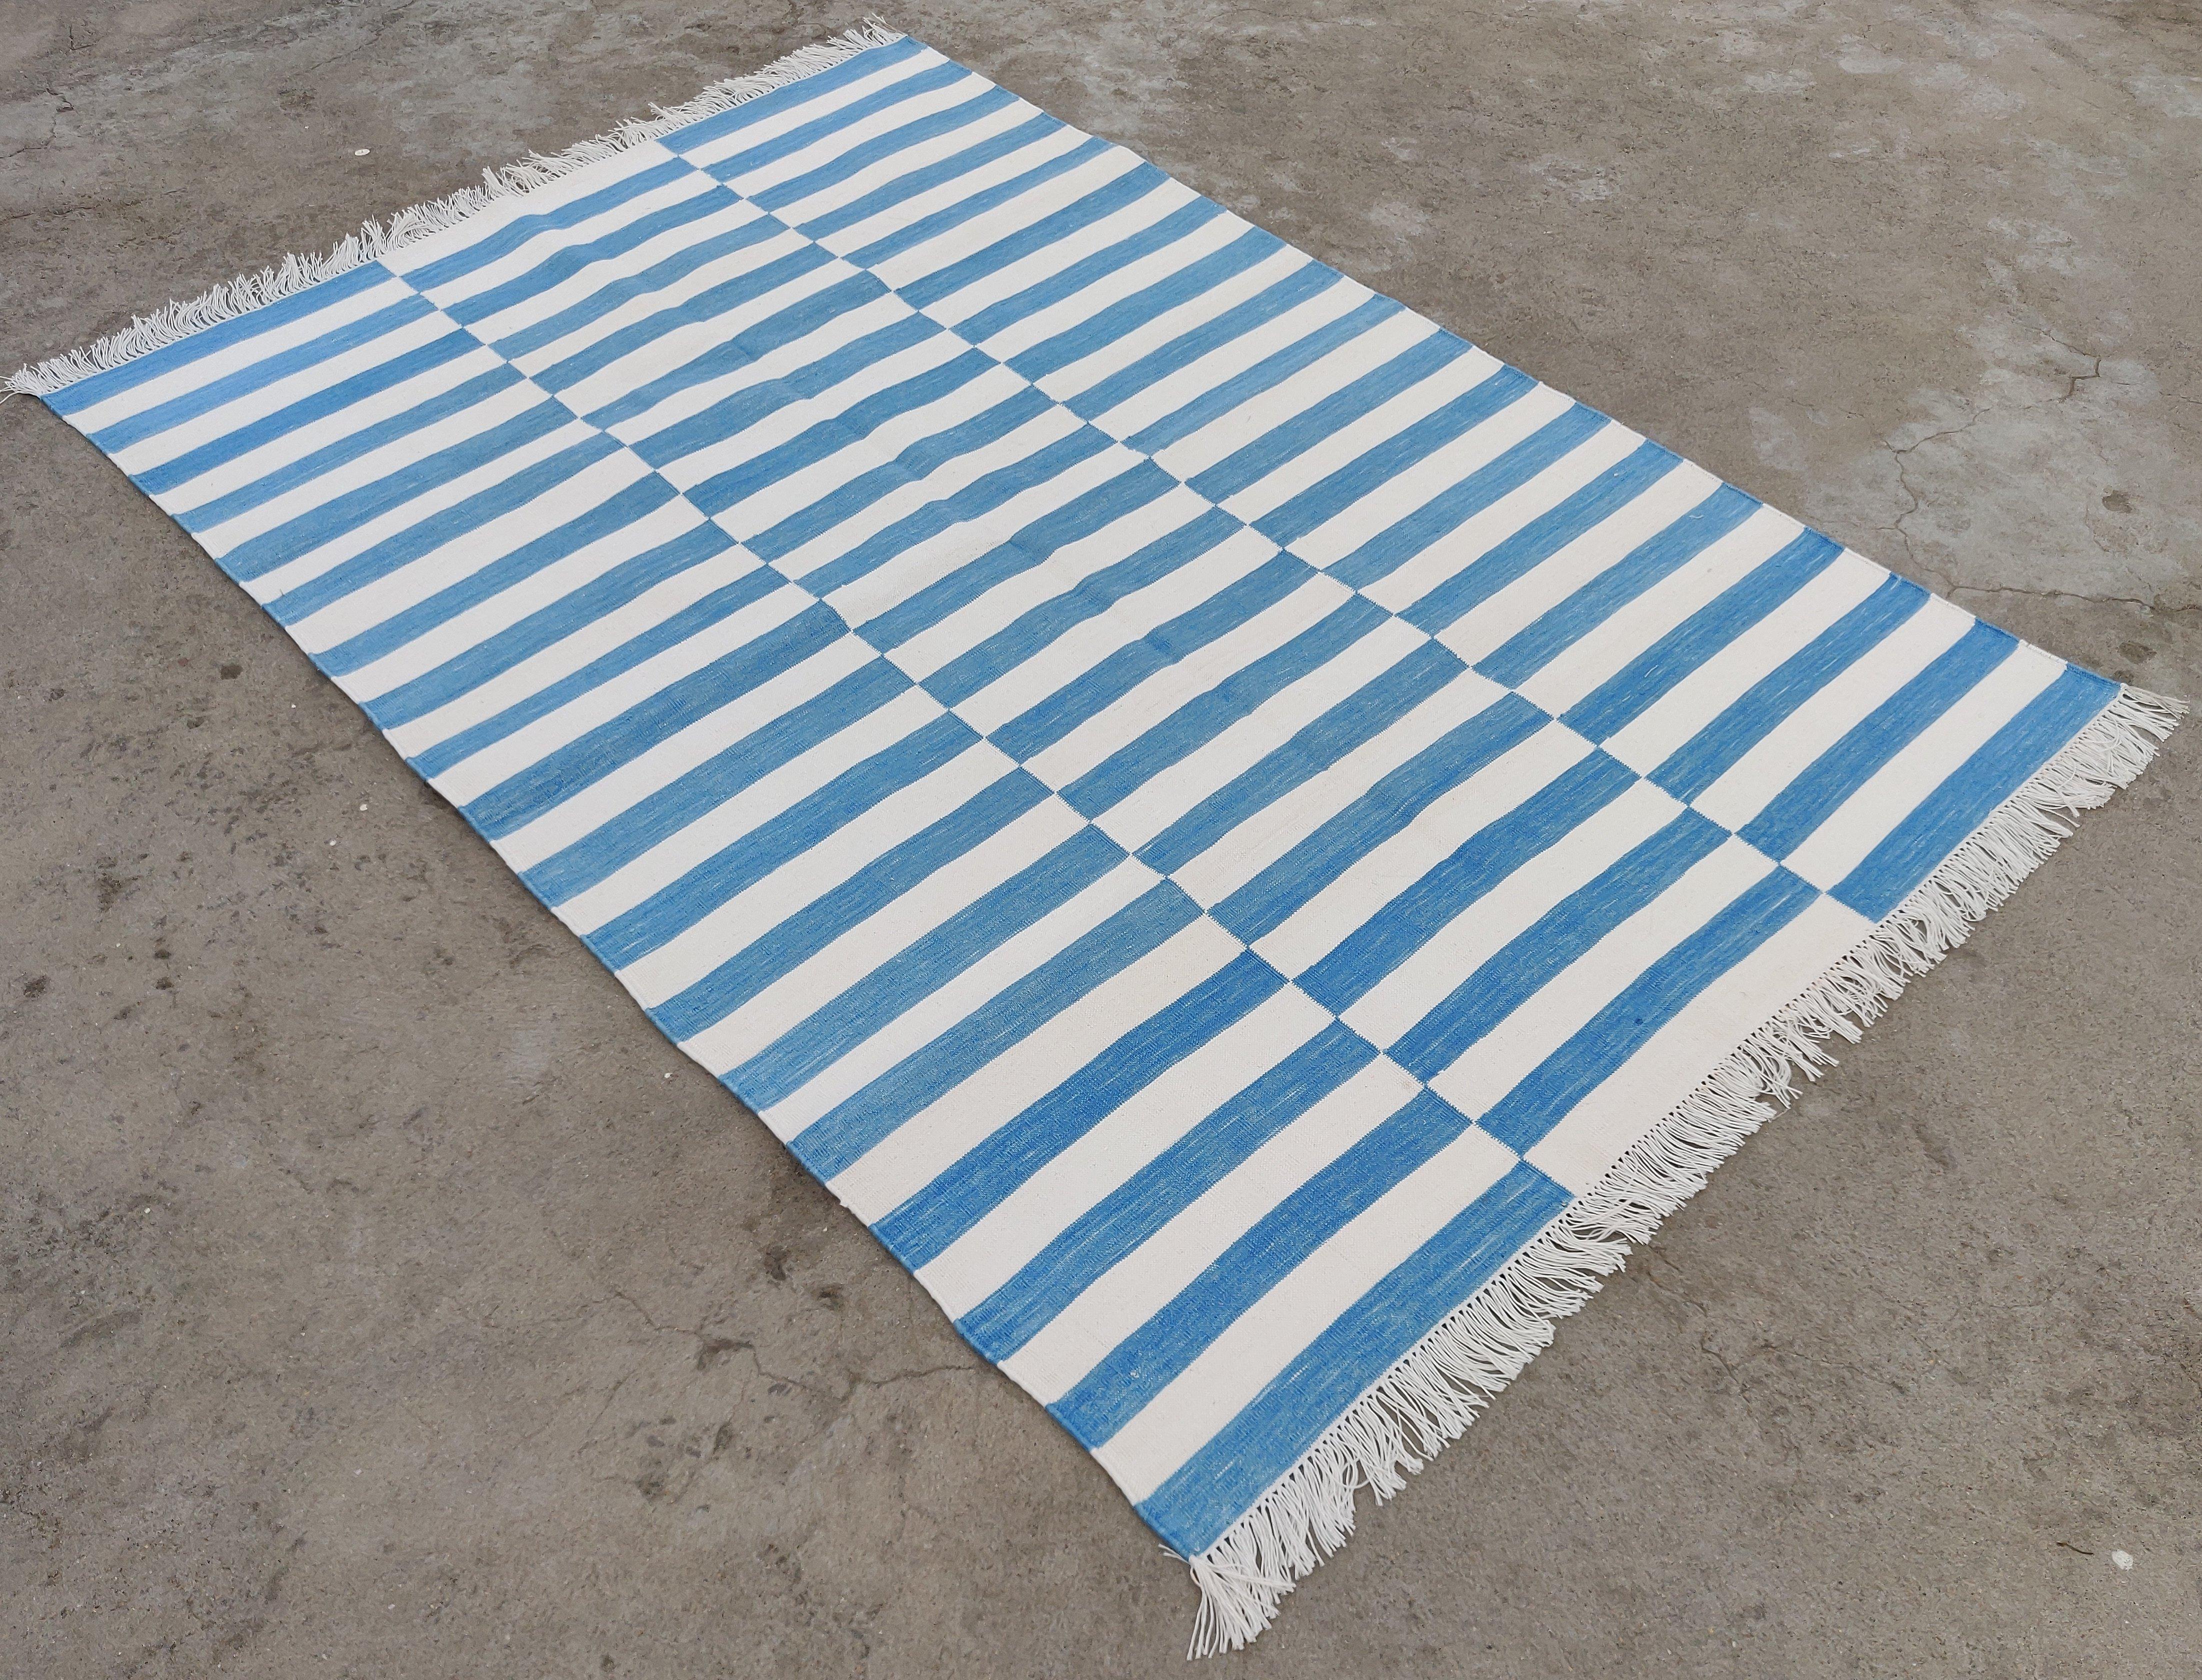 Cotton Vegetable Dyed Sky Blue and White Striped Indian Dhurrie Rug-4'x6' 

These special flat-weave dhurries are hand-woven with 15 ply 100% cotton yarn. Due to the special manufacturing techniques used to create our rugs, the size and color of